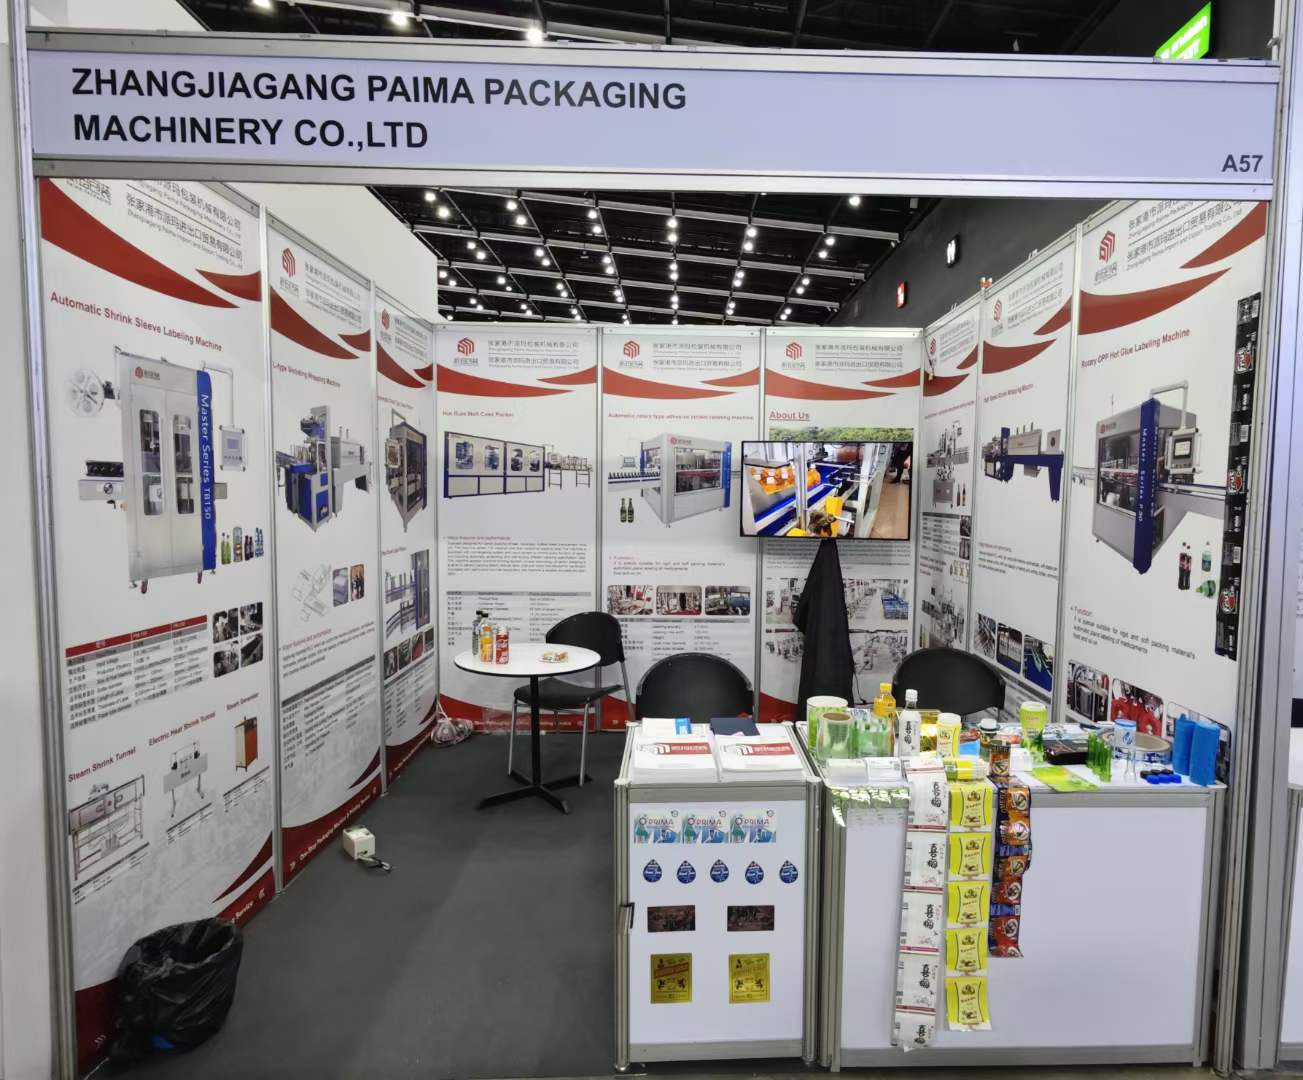 Join us at Propak Asia 2023: Invitation from Paima Packaging